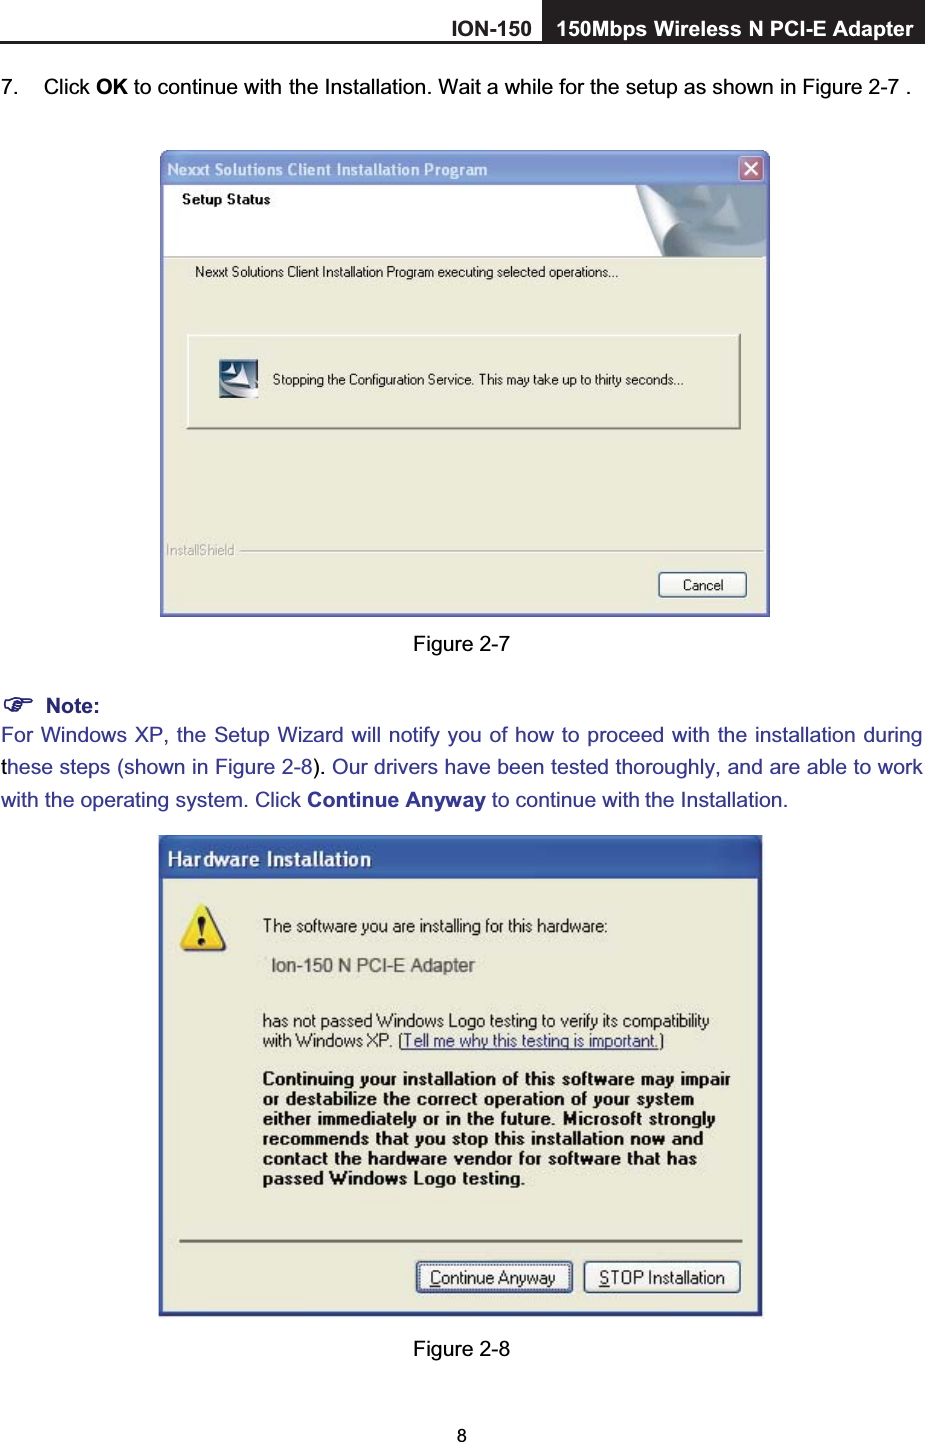 87. Click OK to continue with  the Installation. Wait a while for the setup as shown in Figure 2-7 .Figure 2-7 Note:For Windows XP, the Setup Wizard will notify you of how to proceed with the installation duringthese steps (shown in Figure 2-8). Our drivers have been tested thoroughly, and are able to work with the operating system. Click Continue Anyway to continue with the Installation. Figure 2-8 ION-150 150Mbps         Wireless         N PCI-E Adapter